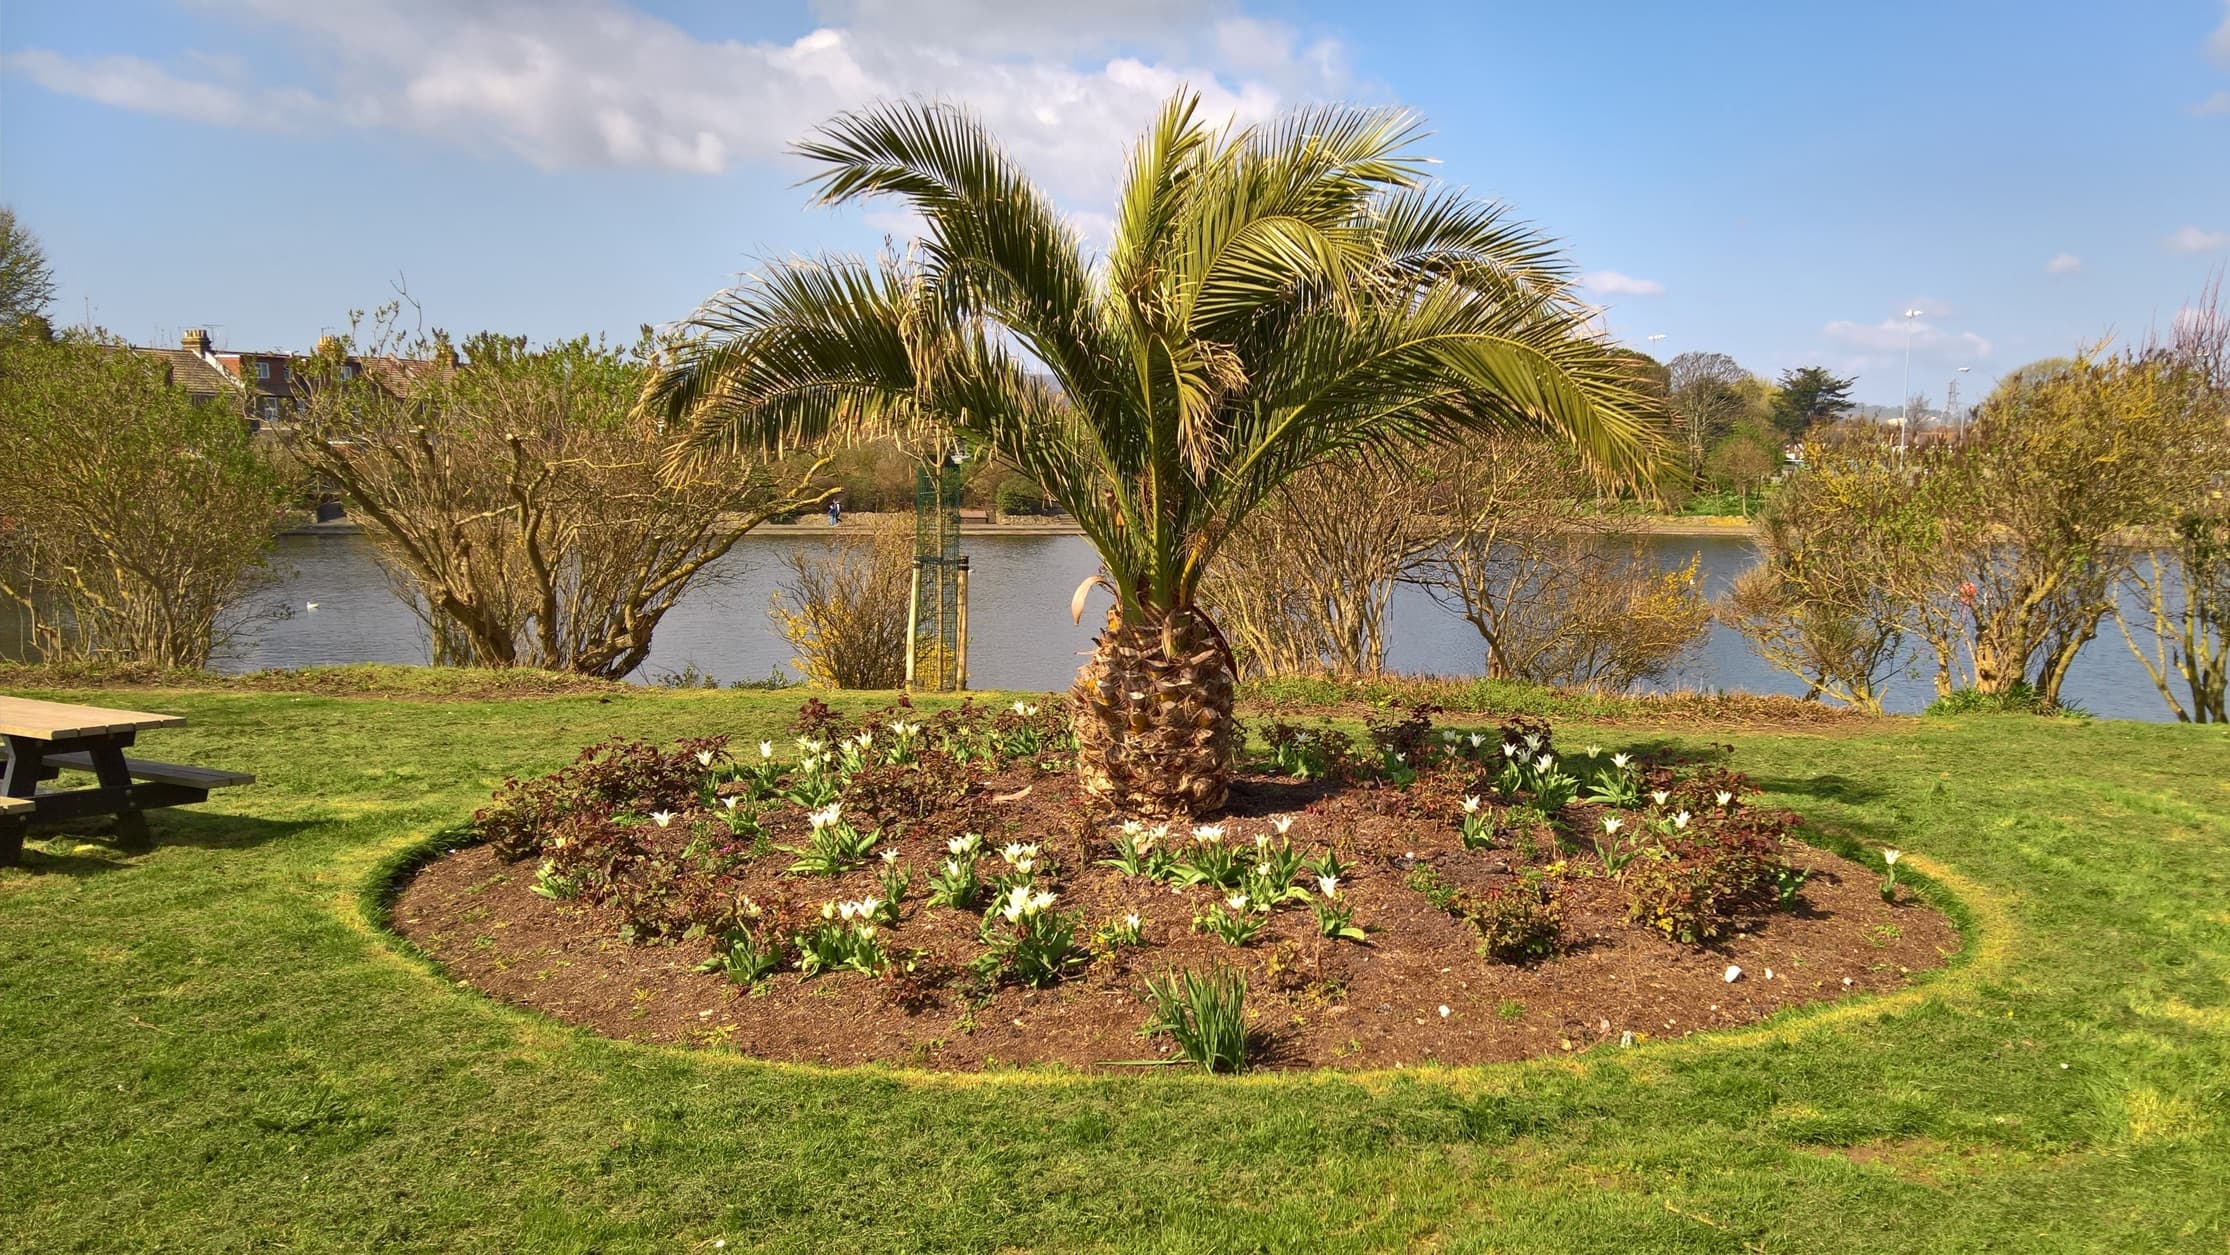 Growing Palm Trees in British Gardens